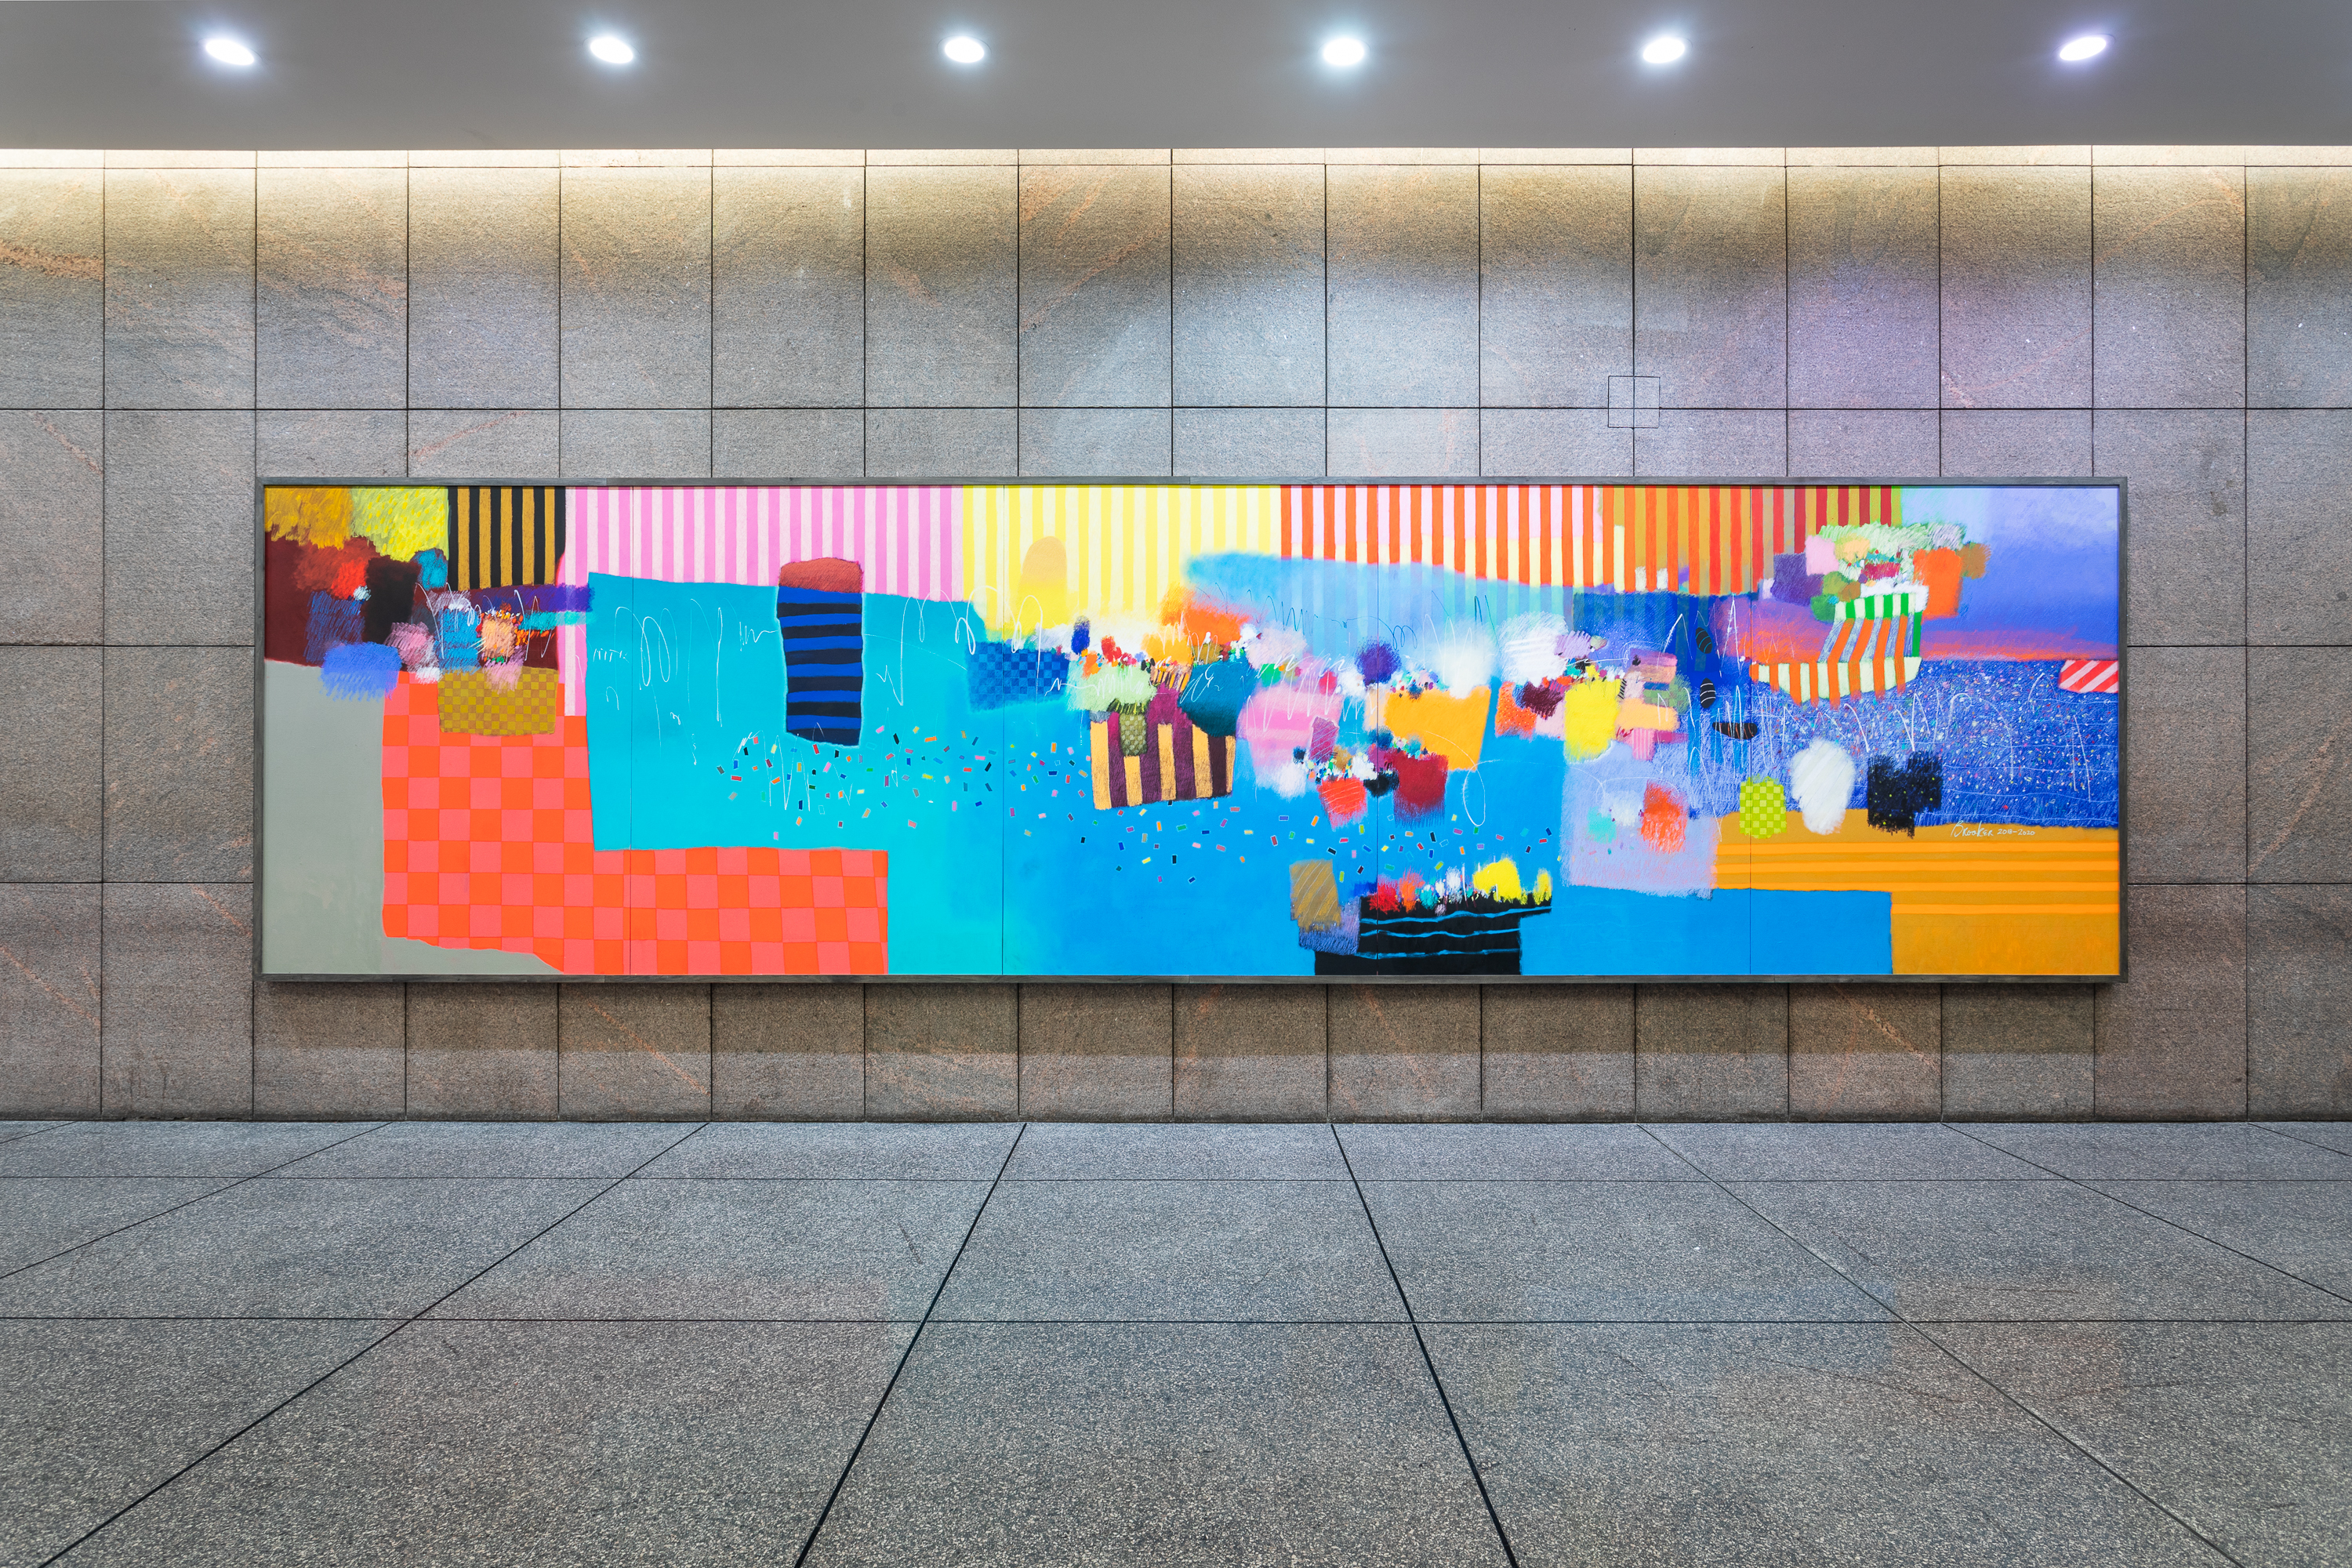 Moe Brooker, “The Fruit of the Spirit,” 2018–2020, acrylic and oil paints and oil stick on canvas, 8 x 30 feet, William J. Green Jr. Federal Building, 600 Arch Street, Philadelphia.